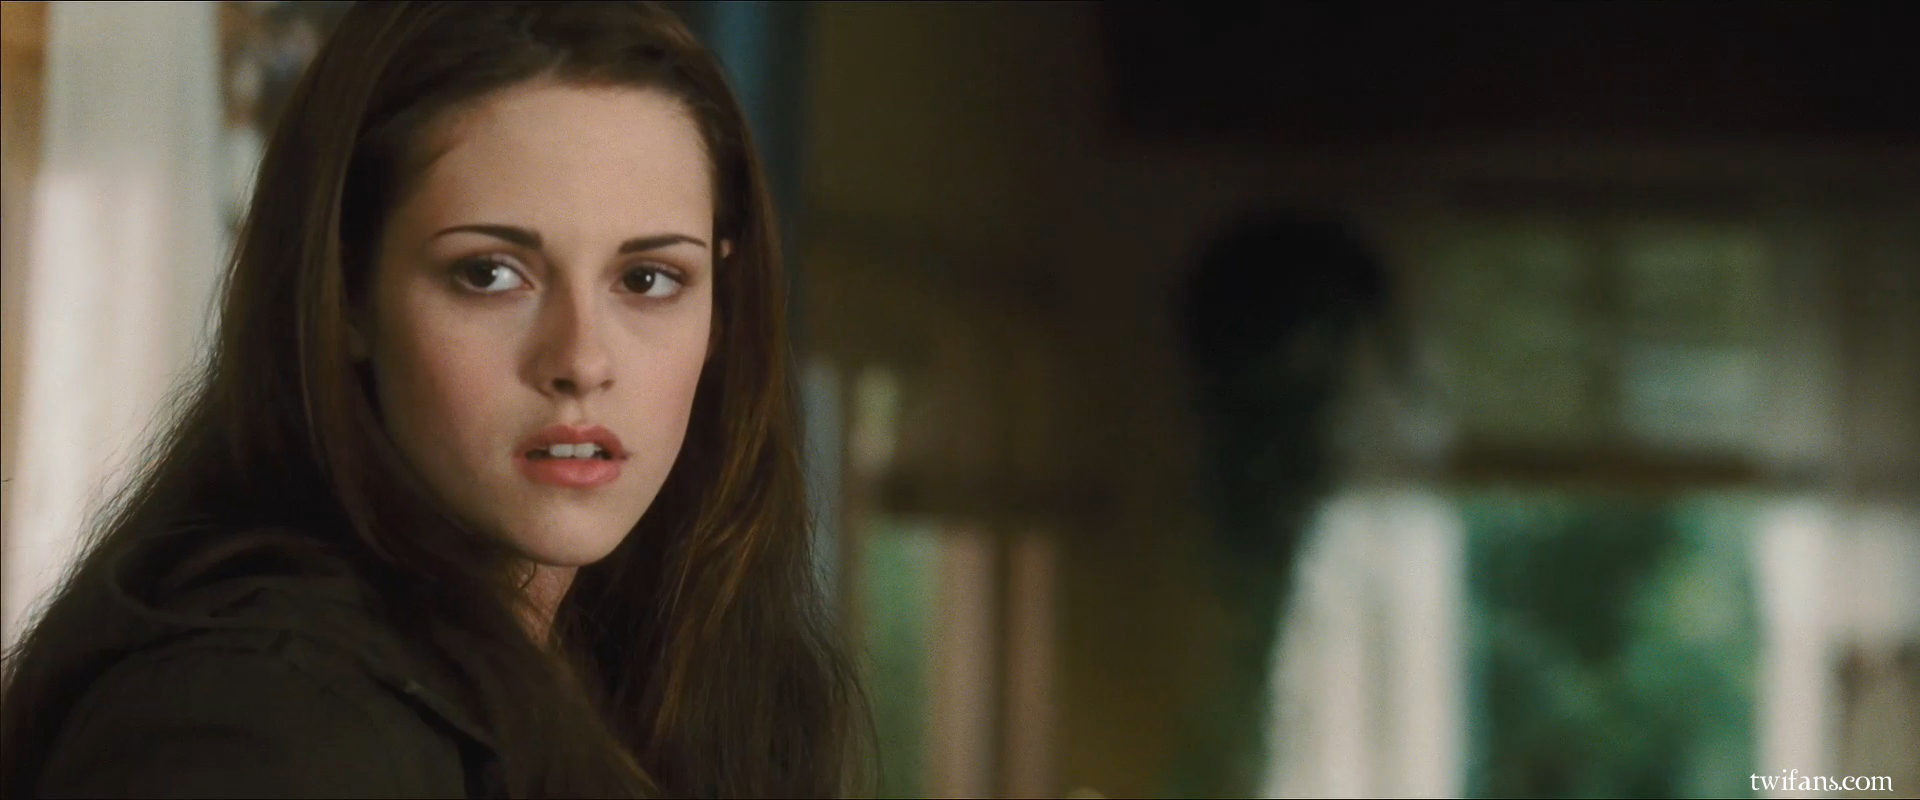 http://images2.fanpop.com/images/photos/7700000/Super-Large-Screencaps-from-New-Moon-3-new-moon-movie-7773106-1920-800.jpg